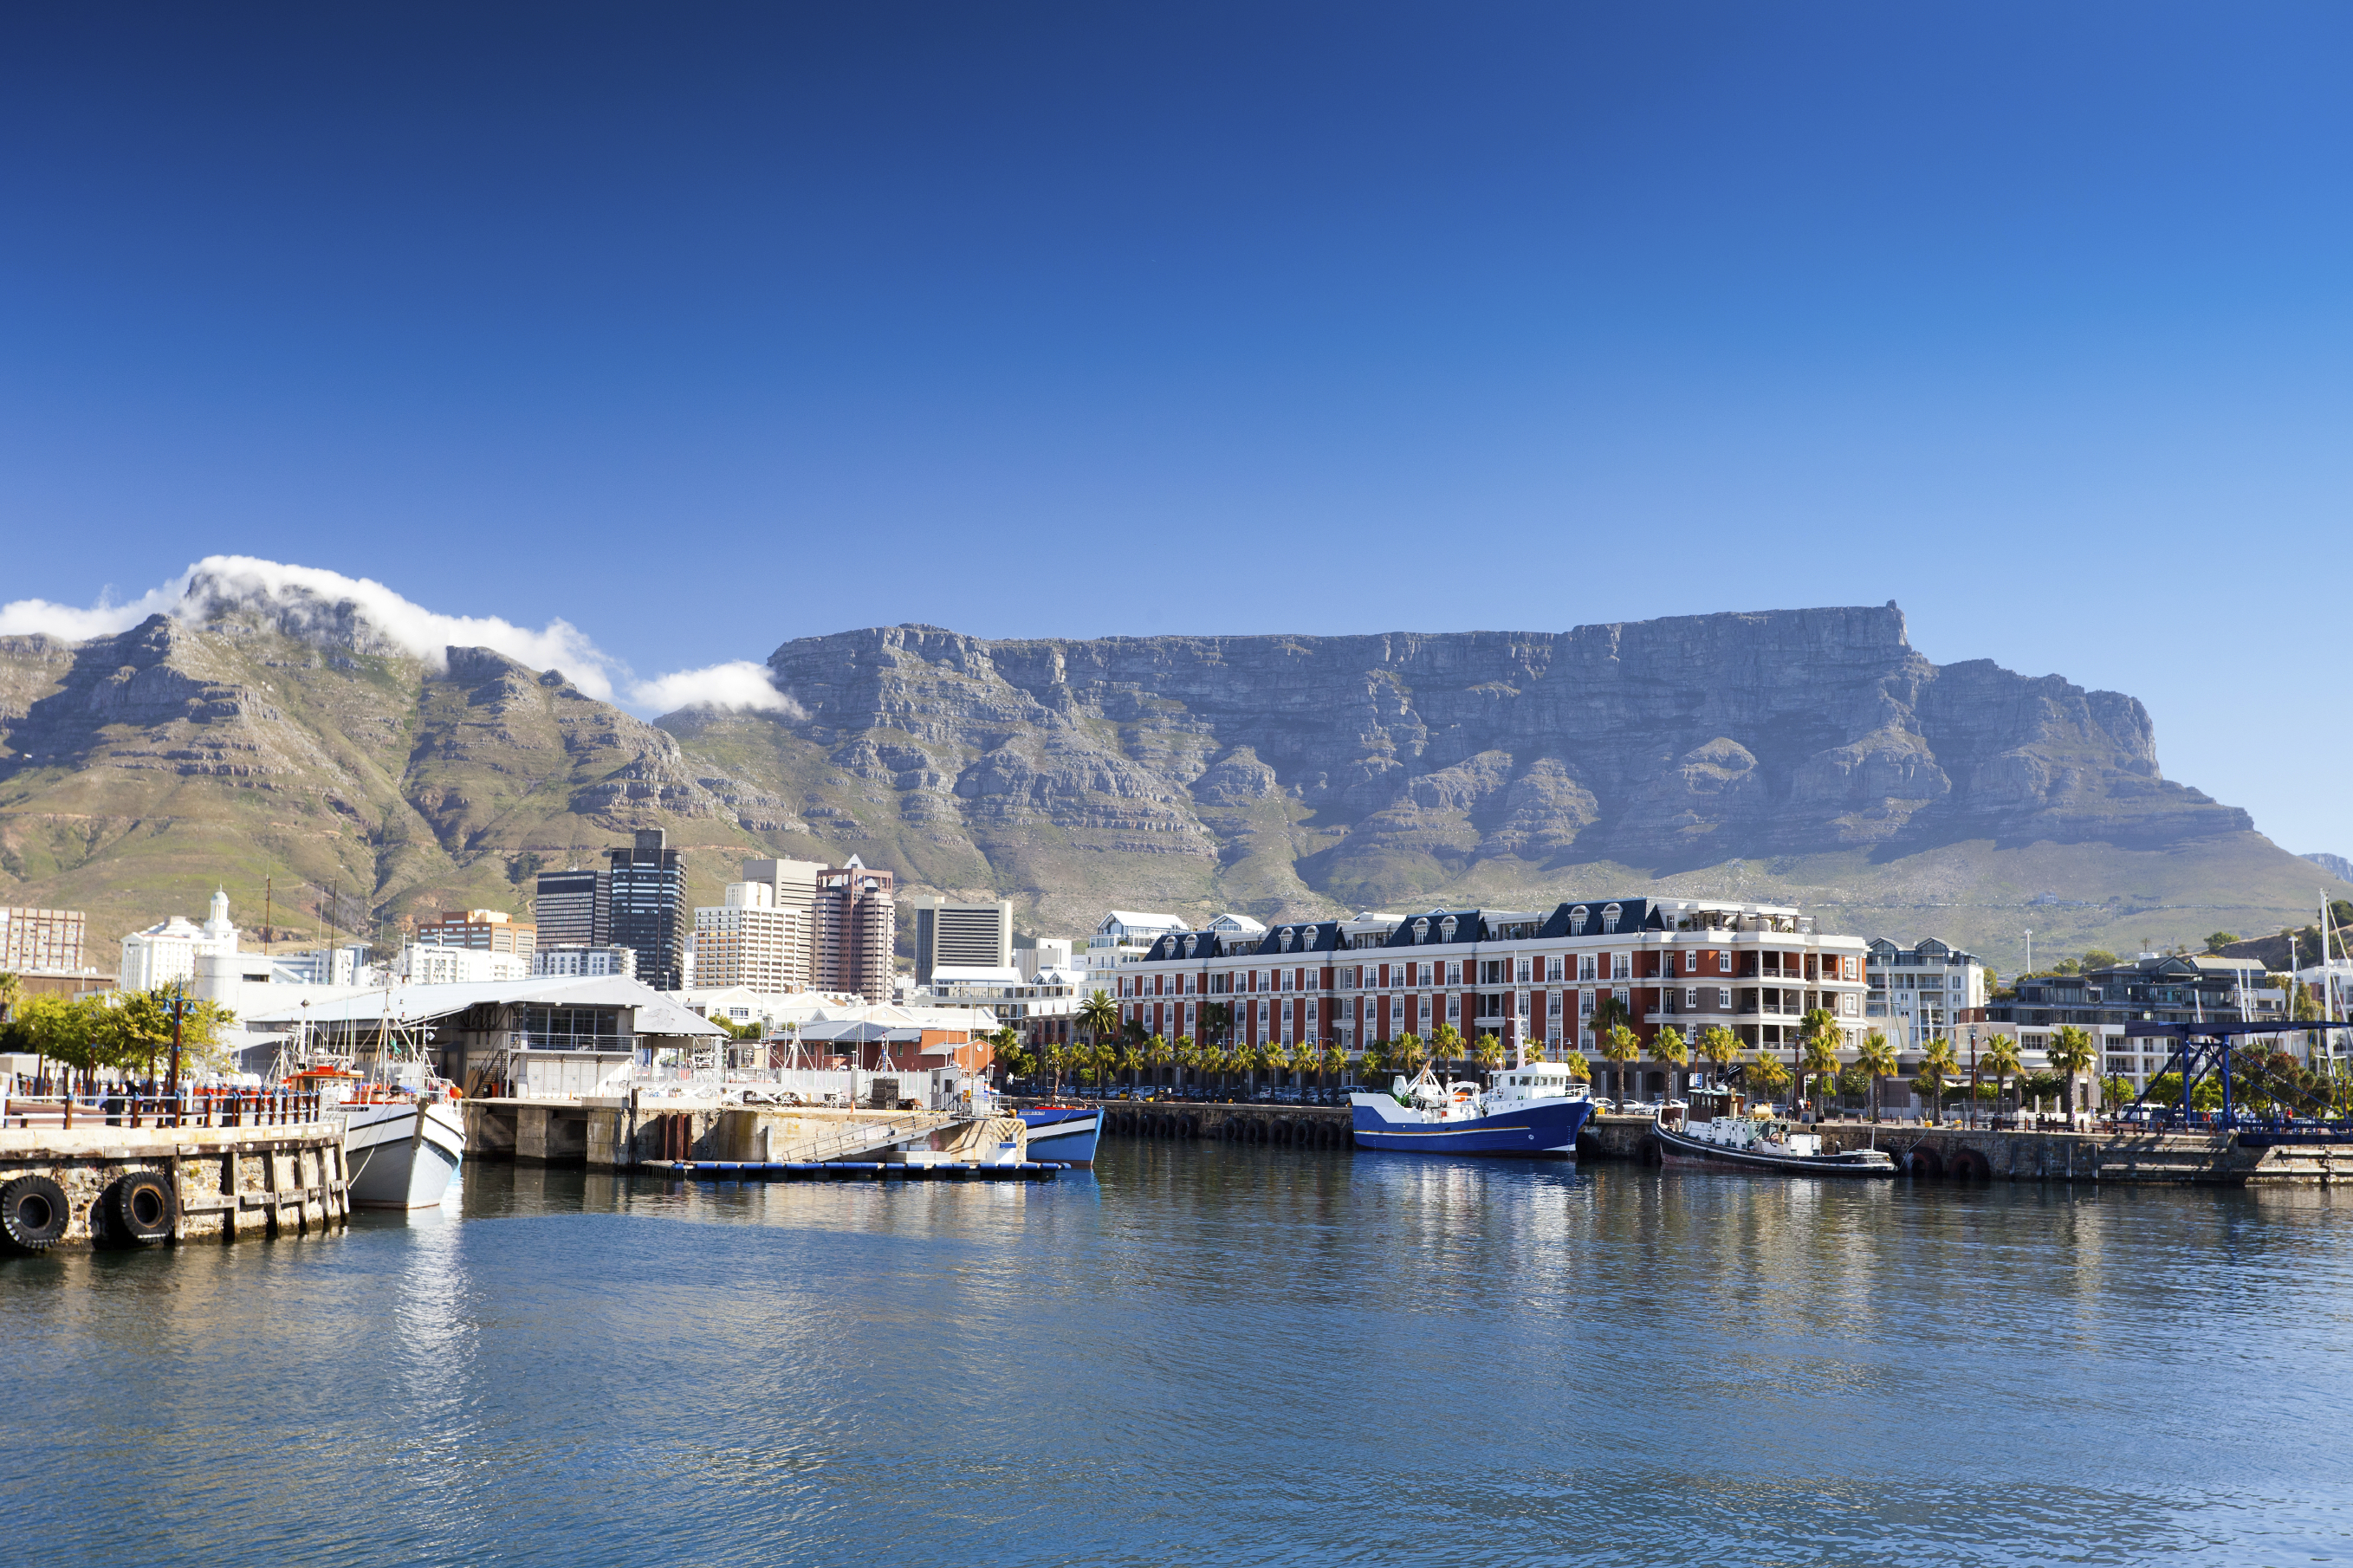 The welcoming site of Table Mountain, Cape Town, South Africa